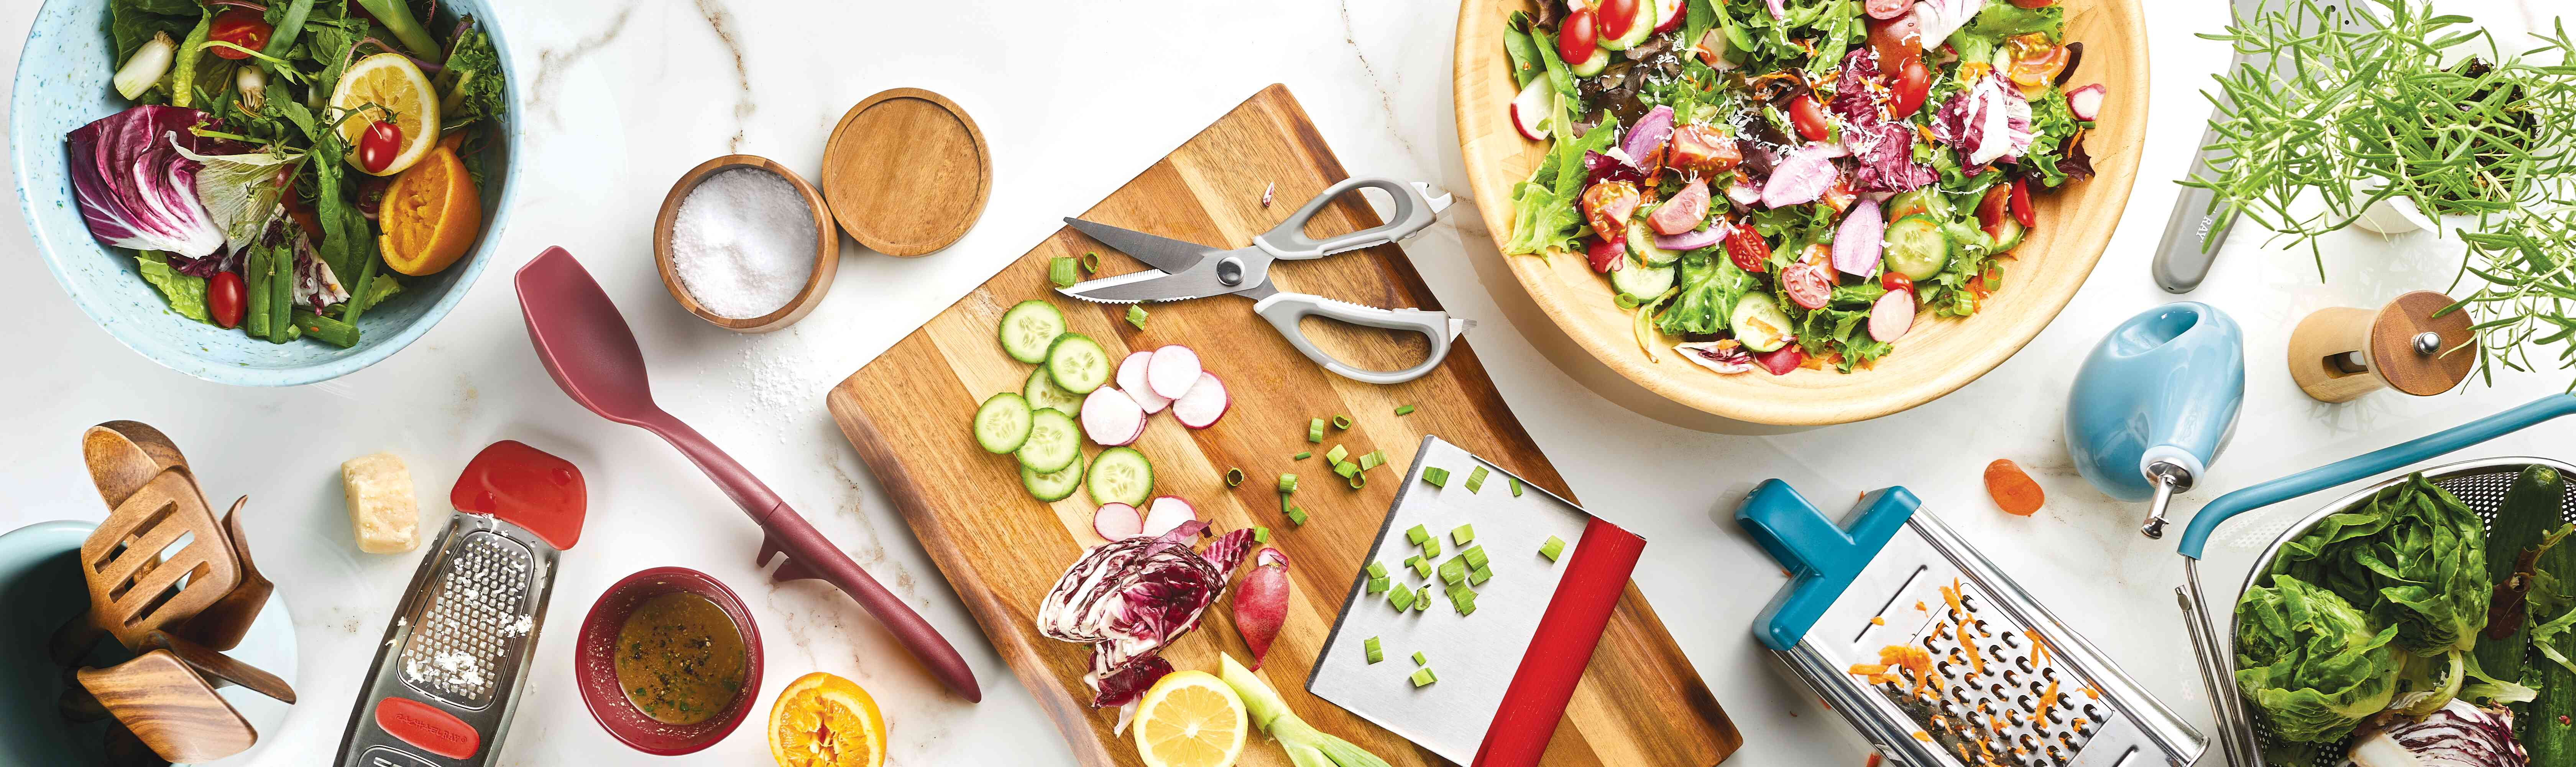 30 Innovative Kitchen Tools & Gadgets You Can Buy